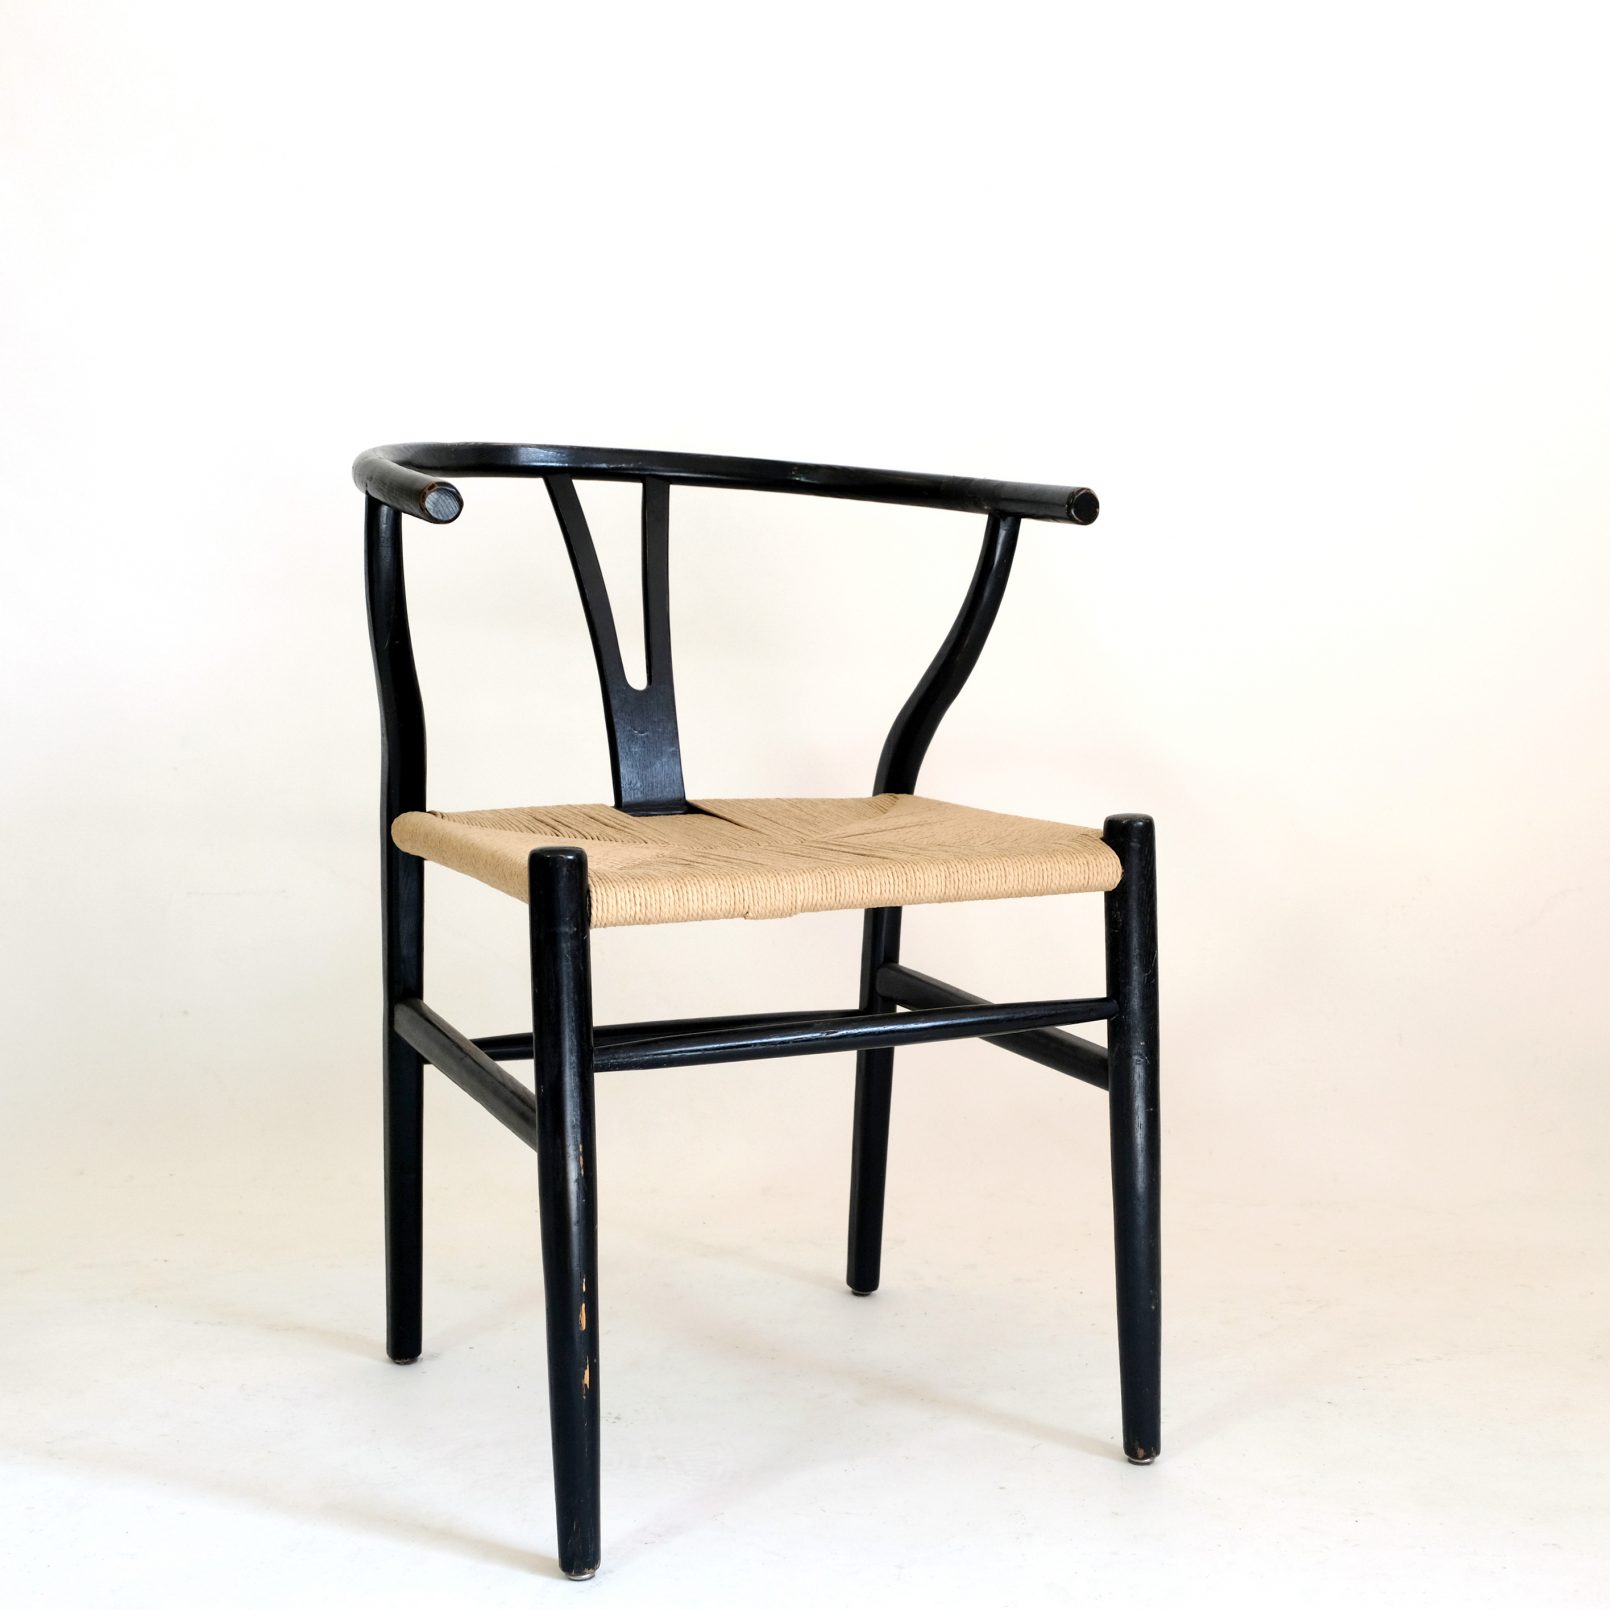 Chair from the seventies, black wood and rope.